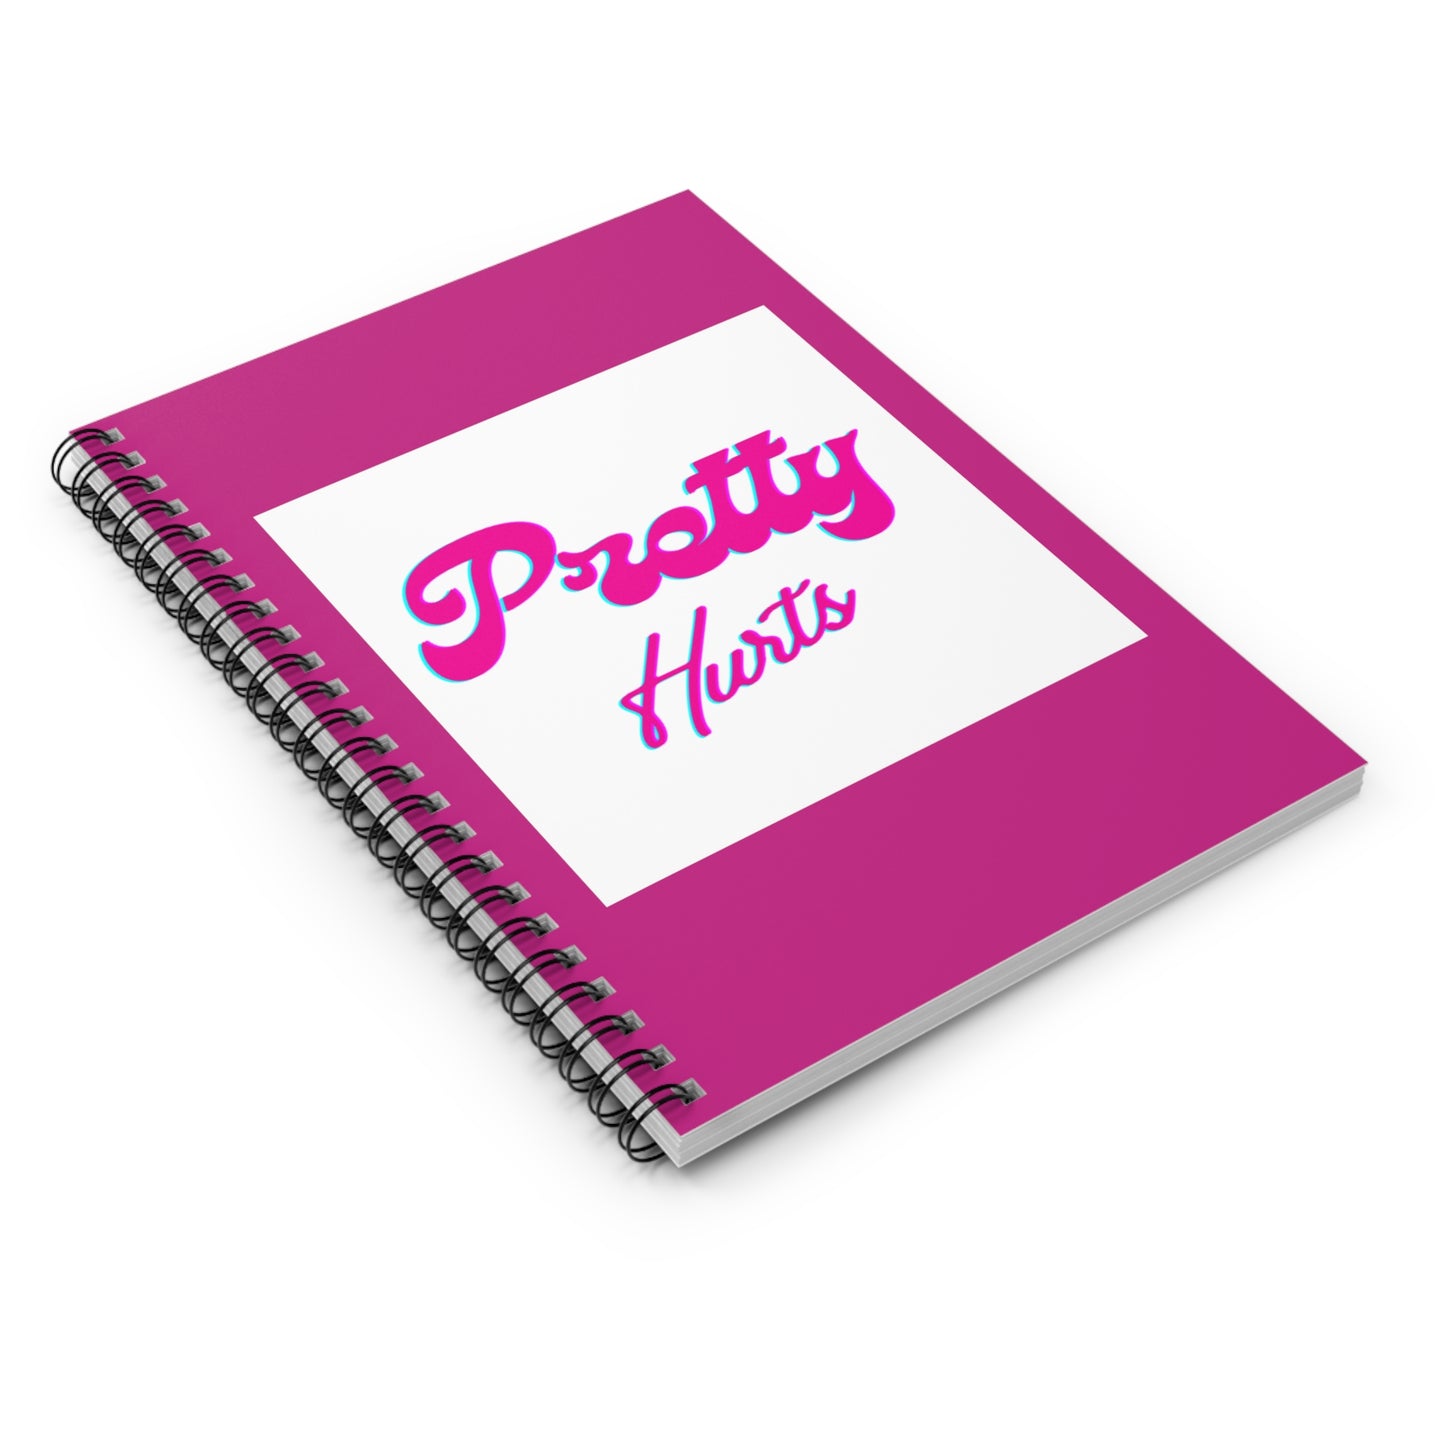 Pretty Hurts Spiral Notebook - Ruled Line